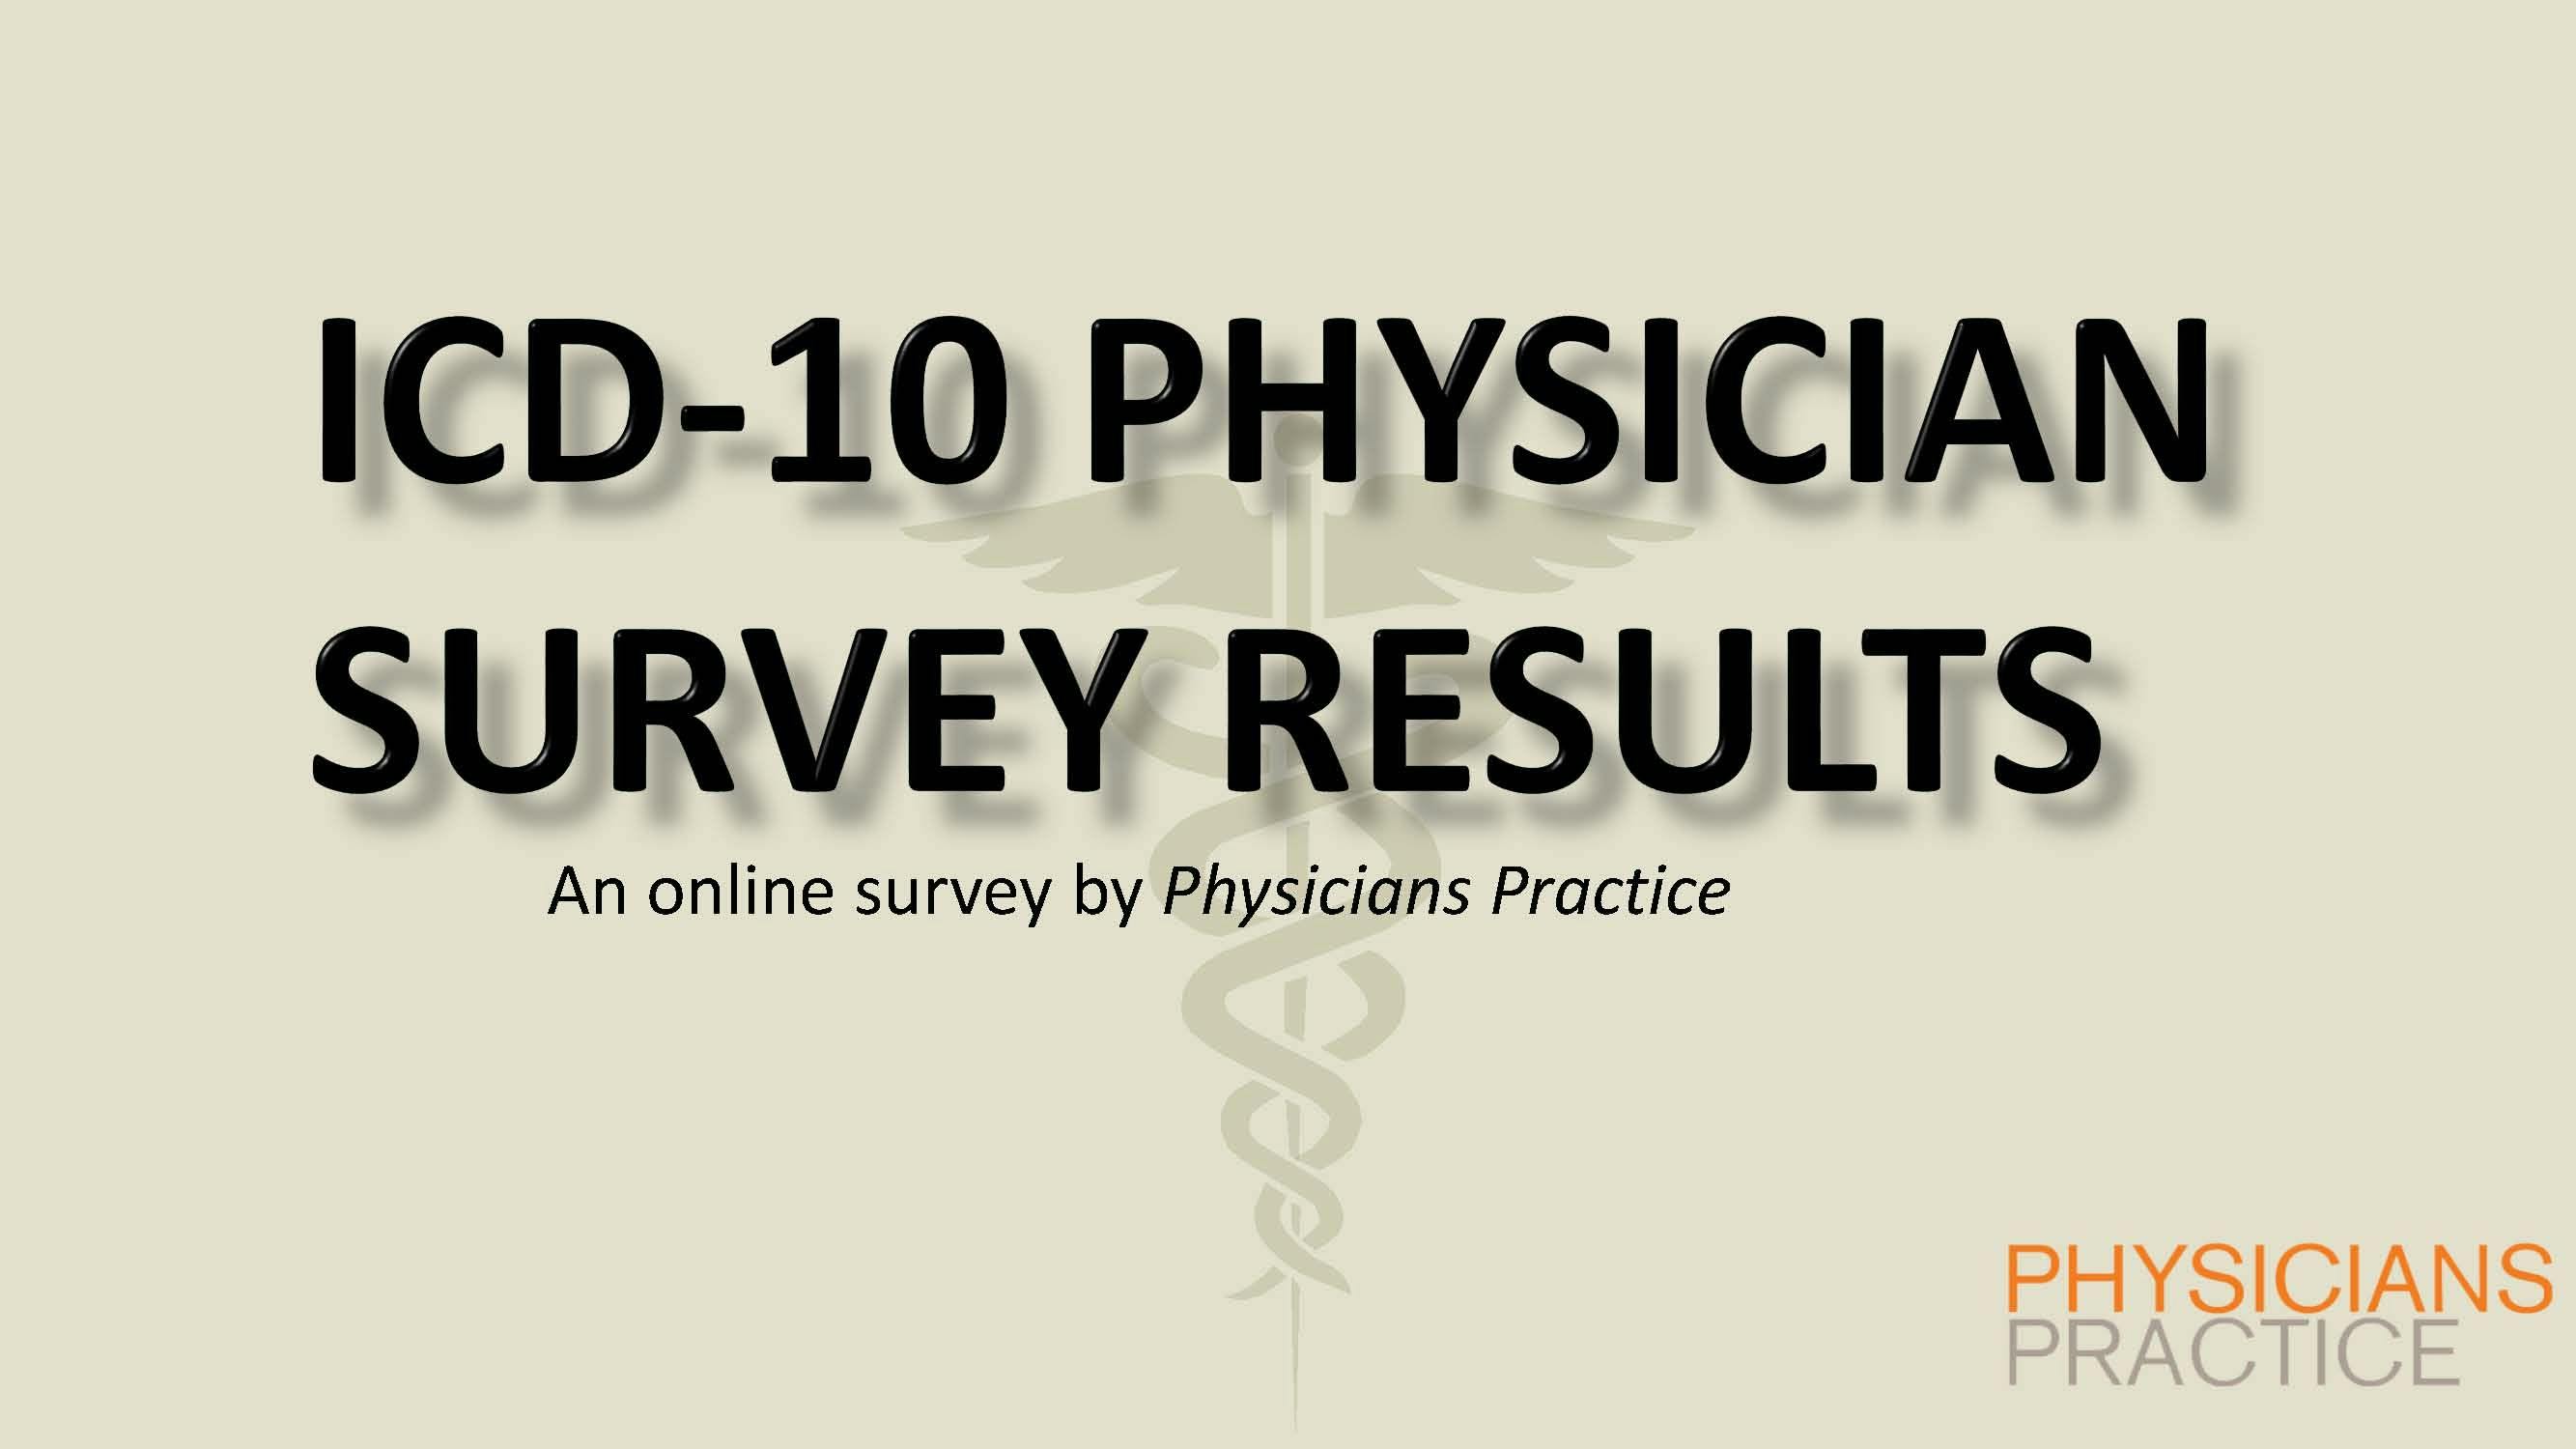 ICD-10 Poll Reveals Few Problems in Transition